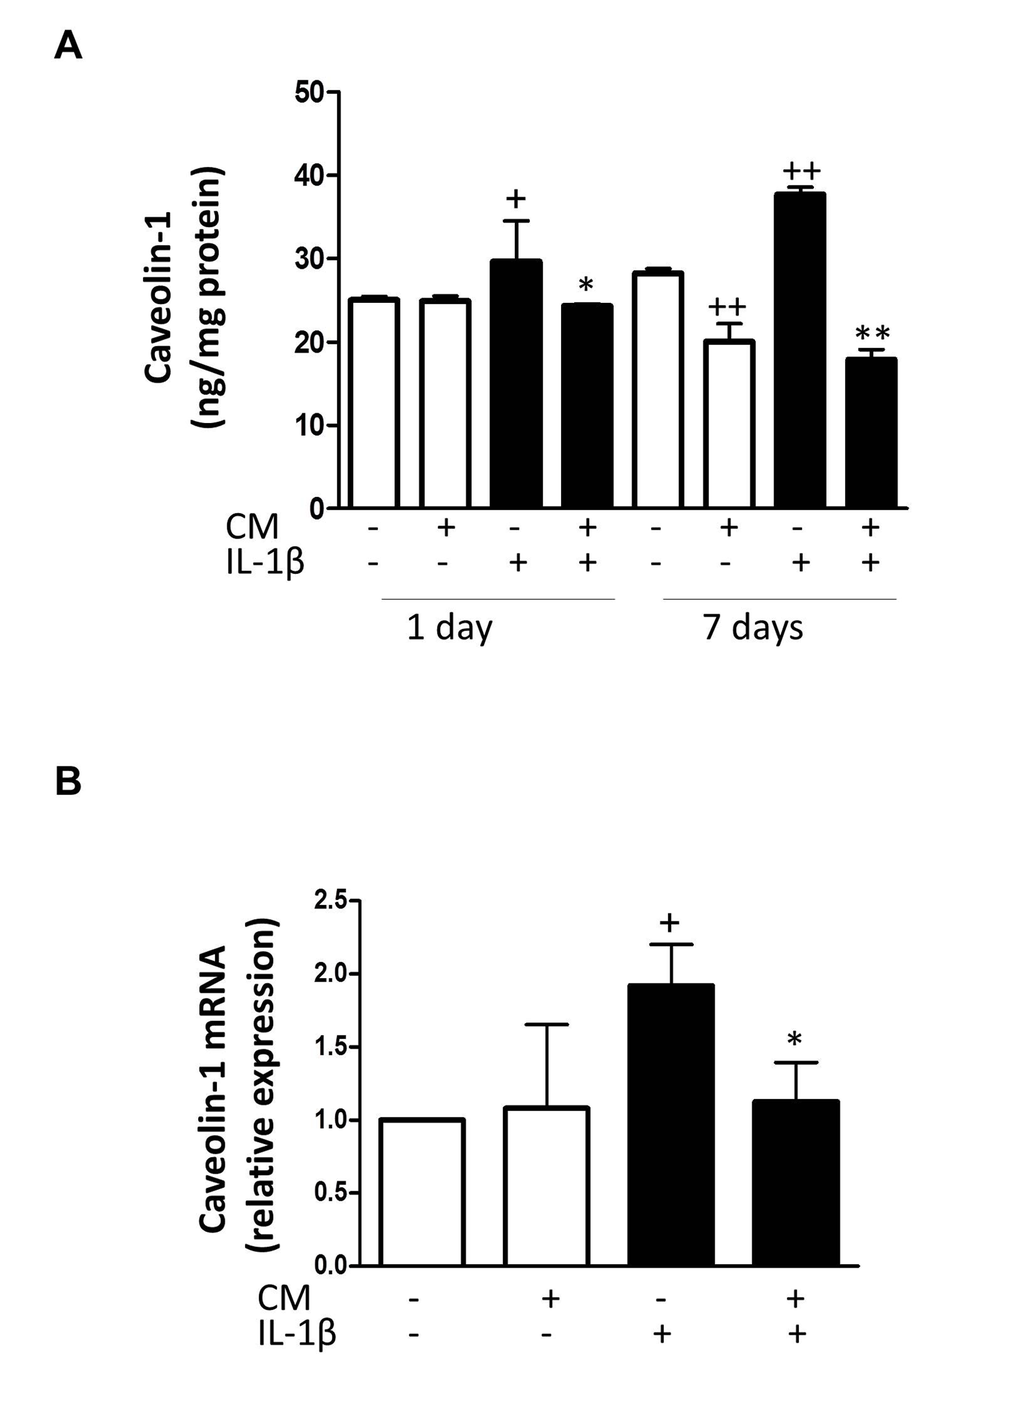 Effect of CM on caveolin-1. (A) Protein levels of caveolin-1 were assessed by ELISA. OA chondrocytes were incubated with IL-1β and/or CM for the indicated times. (B) Caveolin-1 mRNA expression was determined by quantitative real-time PCR. OA chondrocytes were incubated with IL-1β and/or CM for 24 hours. Data are shown as mean±standard deviation of N=4 separate experiments with cells from separate donors. +p